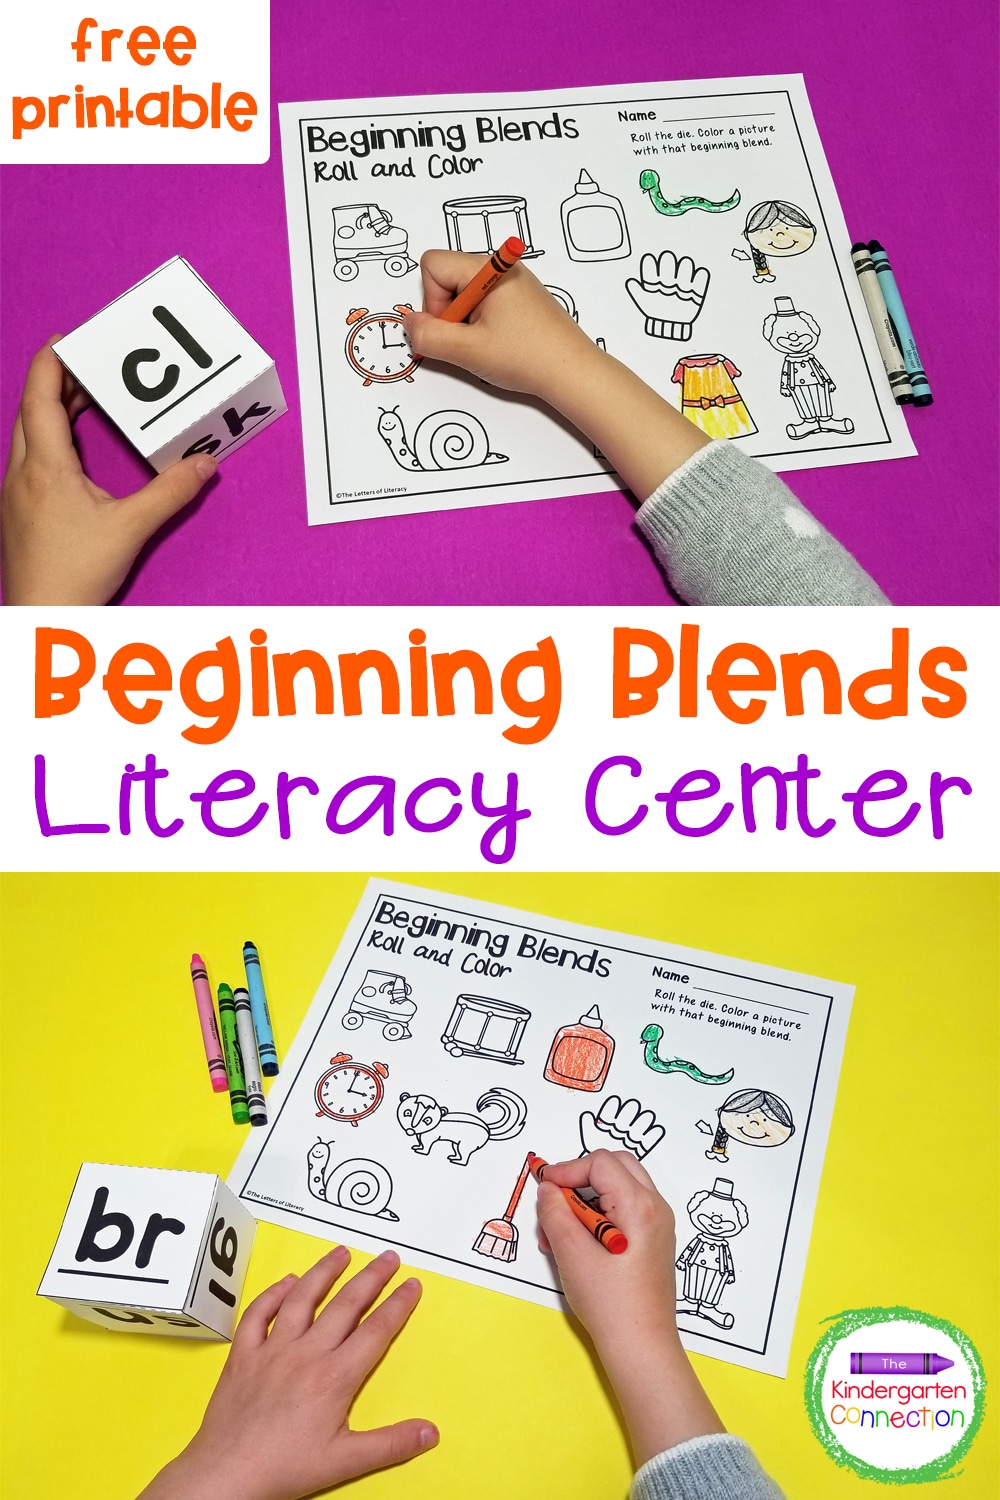 This free Beginning Blends Roll and Color Game is perfect for Kindergarteners and 1st graders working on early reading skills!